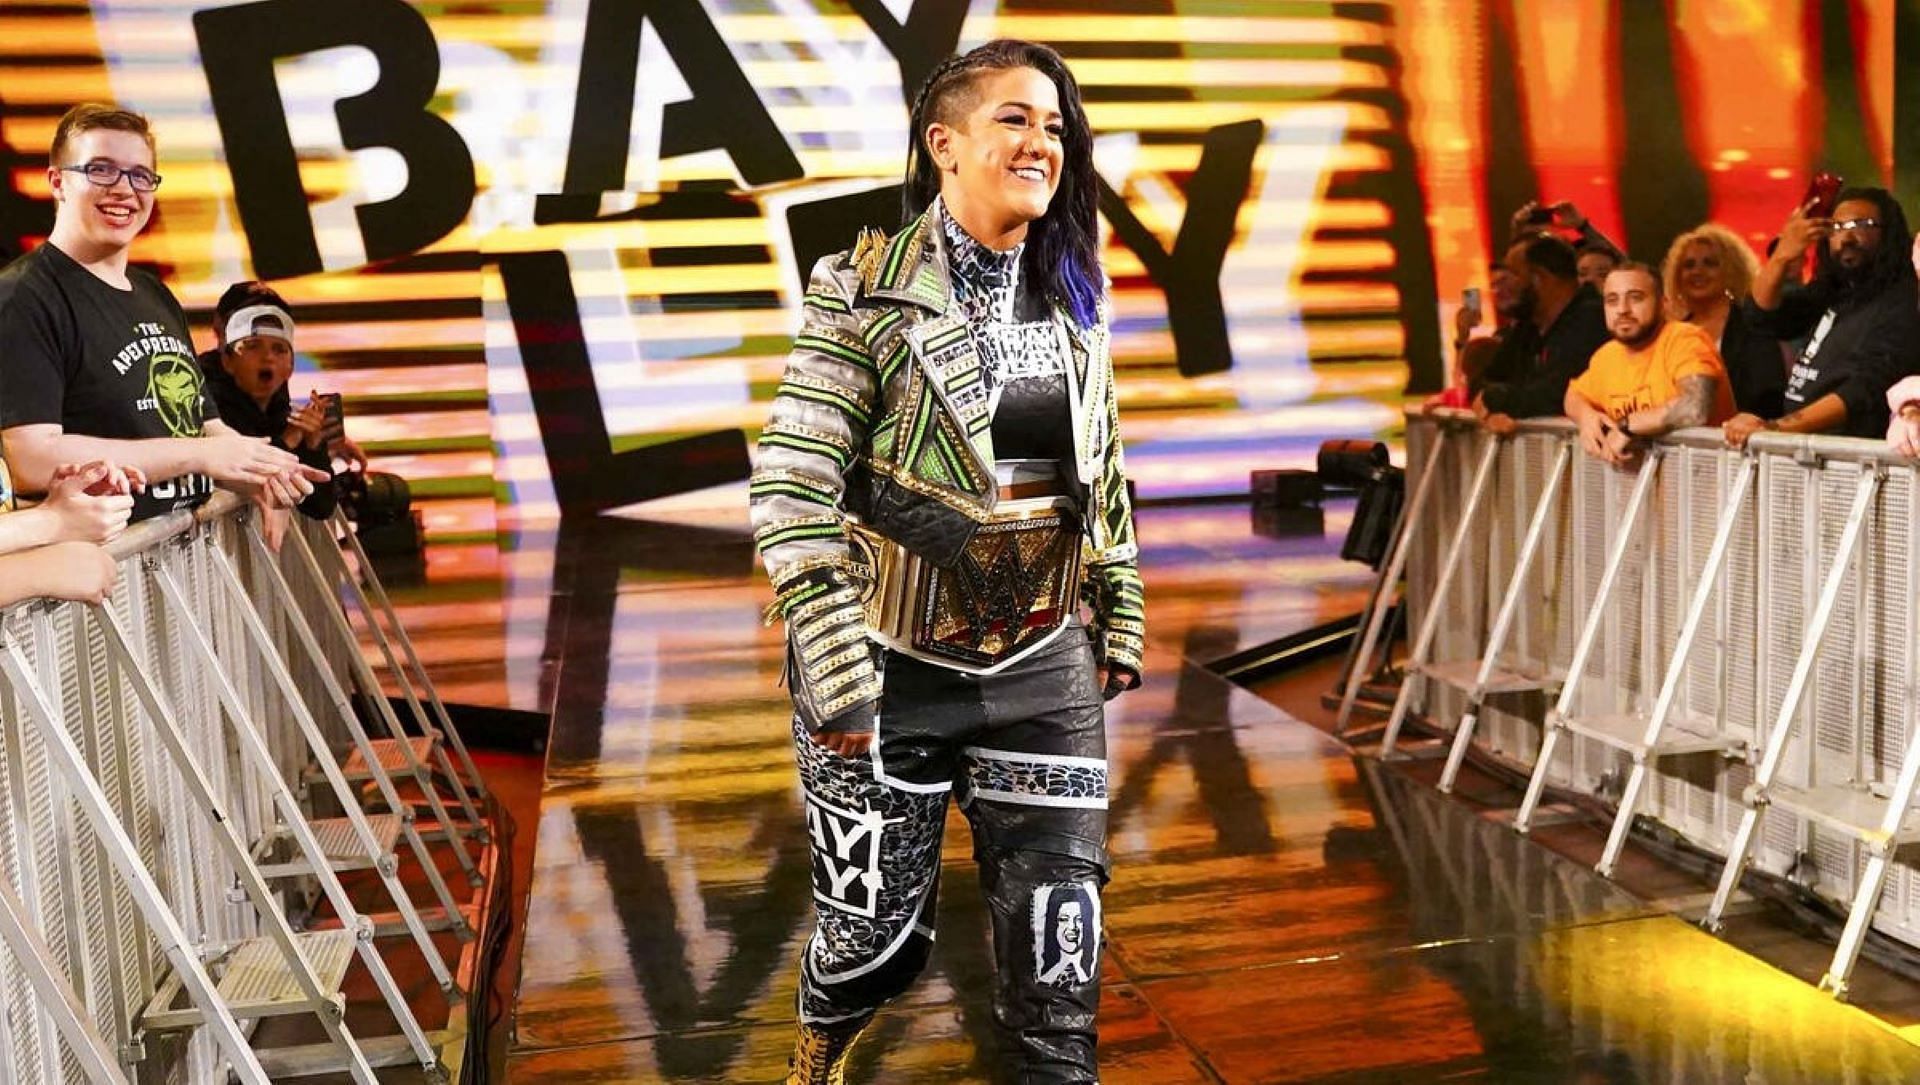 Bayley won her first singles title in years at WrestleMania 40.